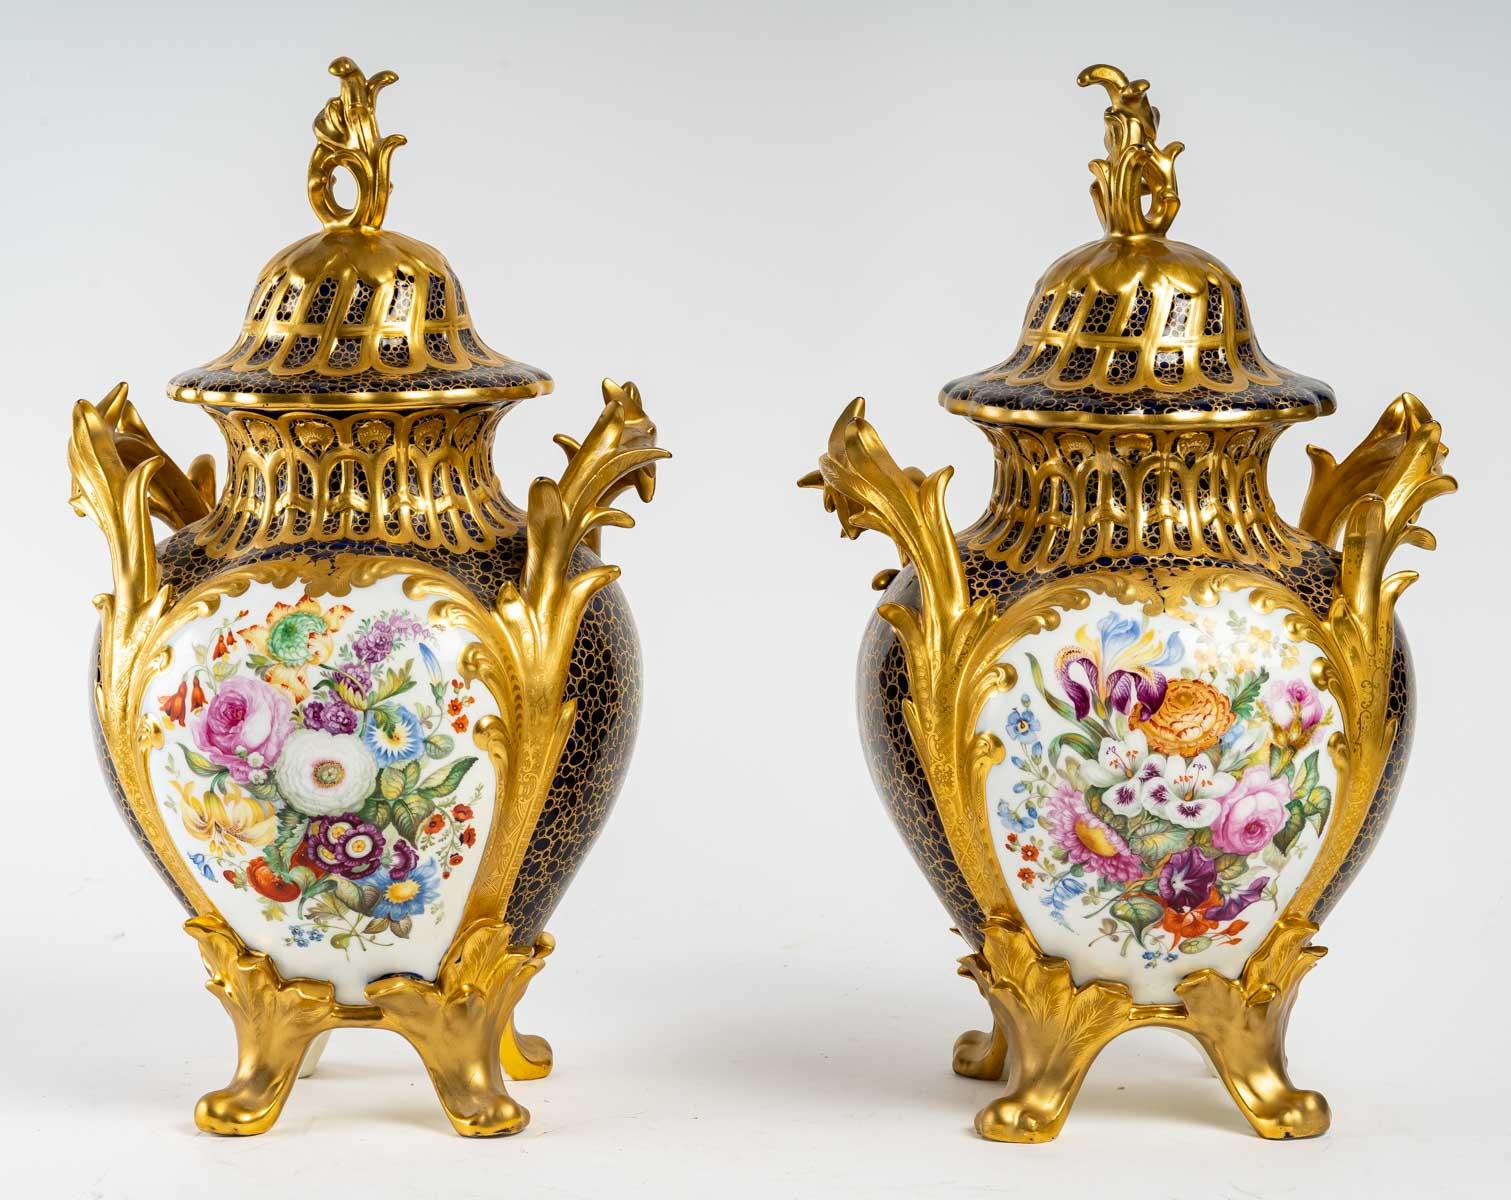 Napoleon III Pair of Gilt and Enamelled Porcelain Covered Vases